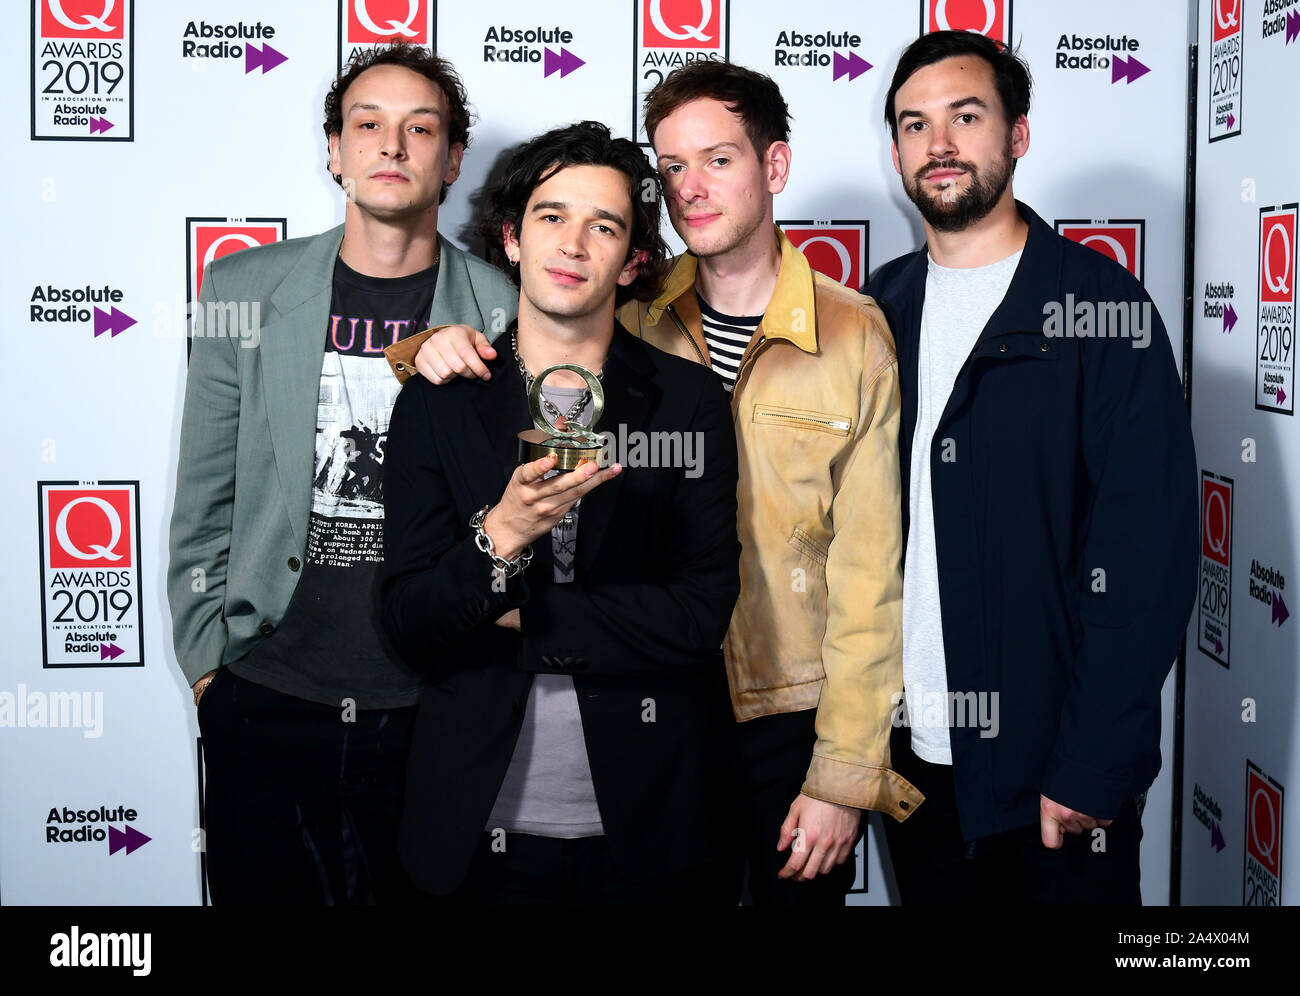 Adam Hann, Matthew Healy, George Daniel and Ross McDonald of the band The 1975 with the Q Best Act in the World award during the Q Awards 2019 in association with Absolute Radio at the Camden Roundhouse, London. Stock Photo